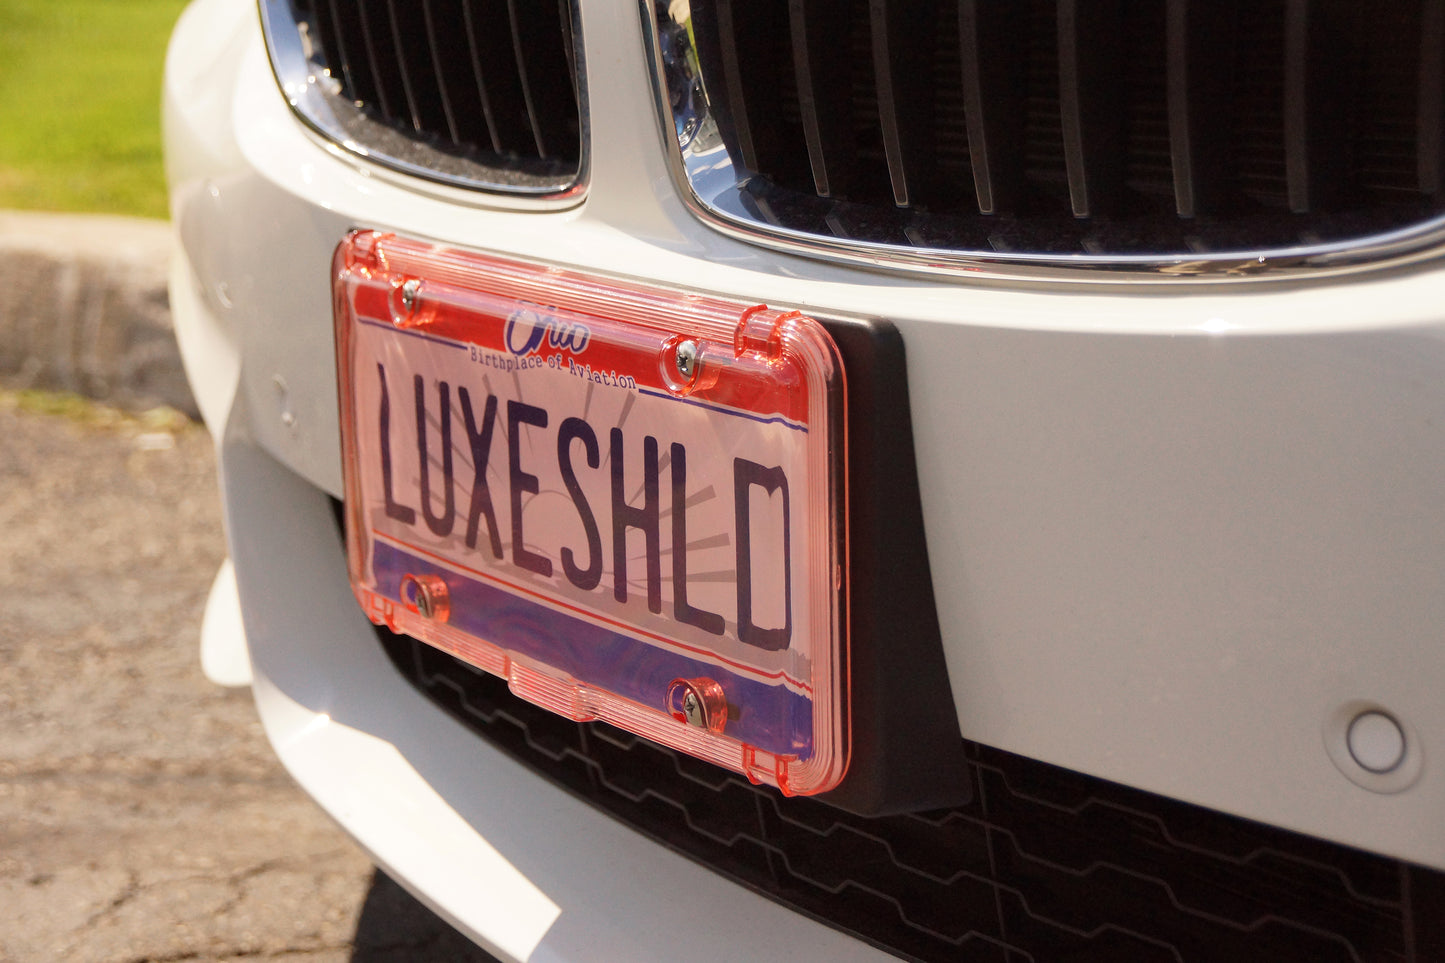 Luxe Shield, Premium Pink License Plate Covers (2-Pack) includes Stainless Screws